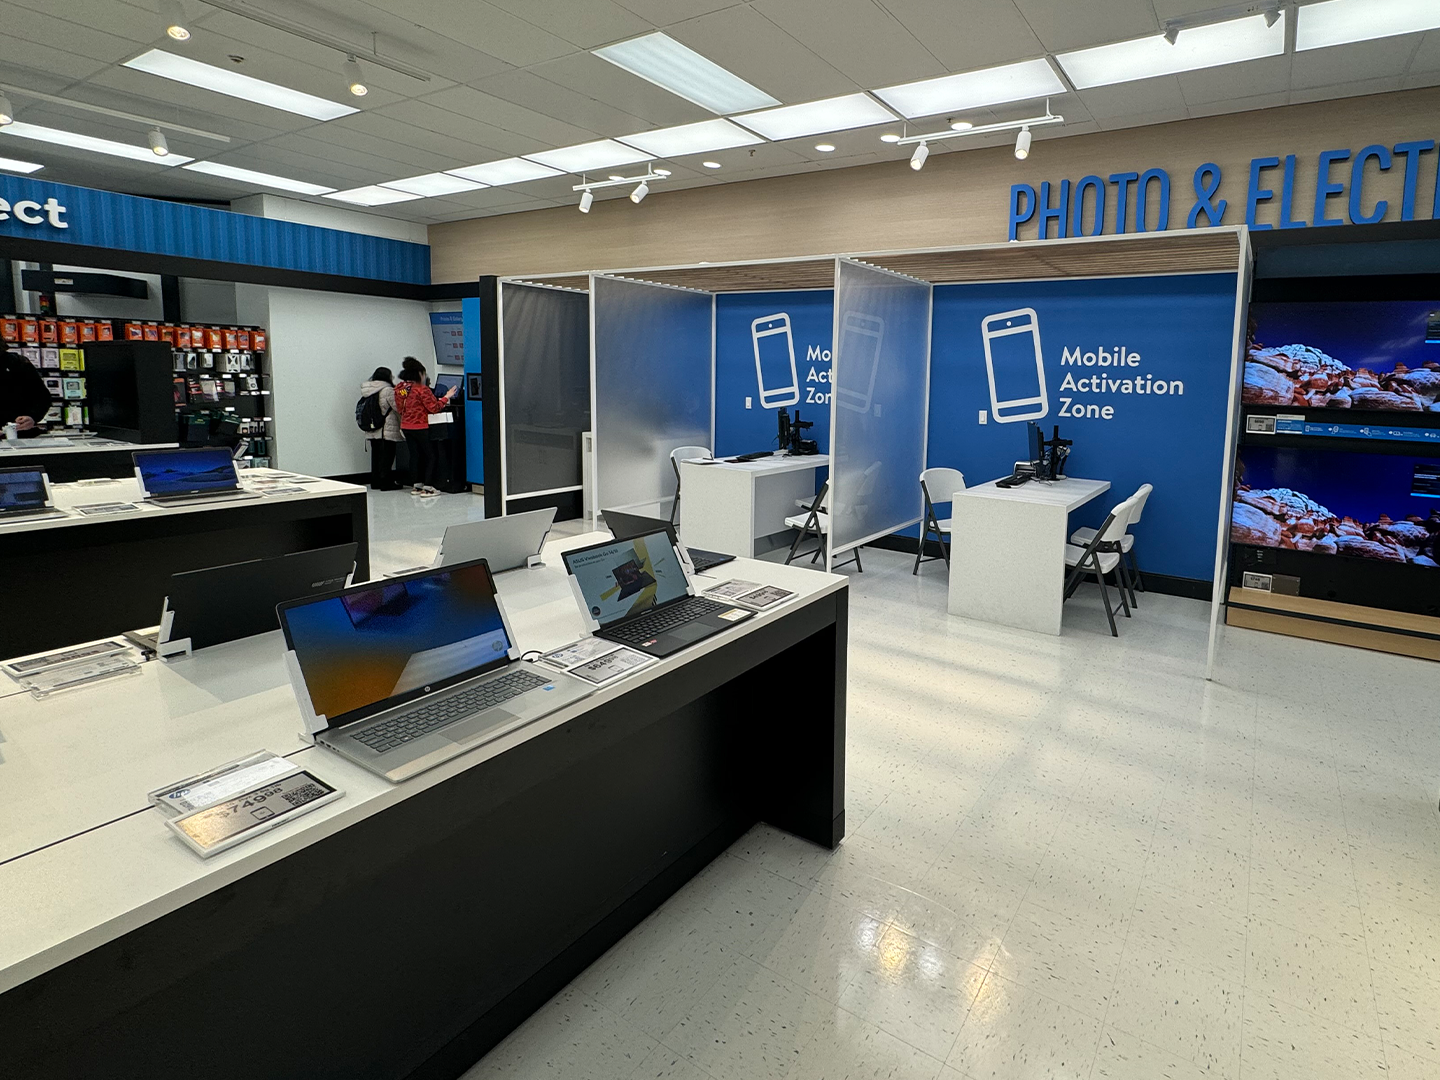 Overview of the Walmart electronic department, showcasing the modern setup